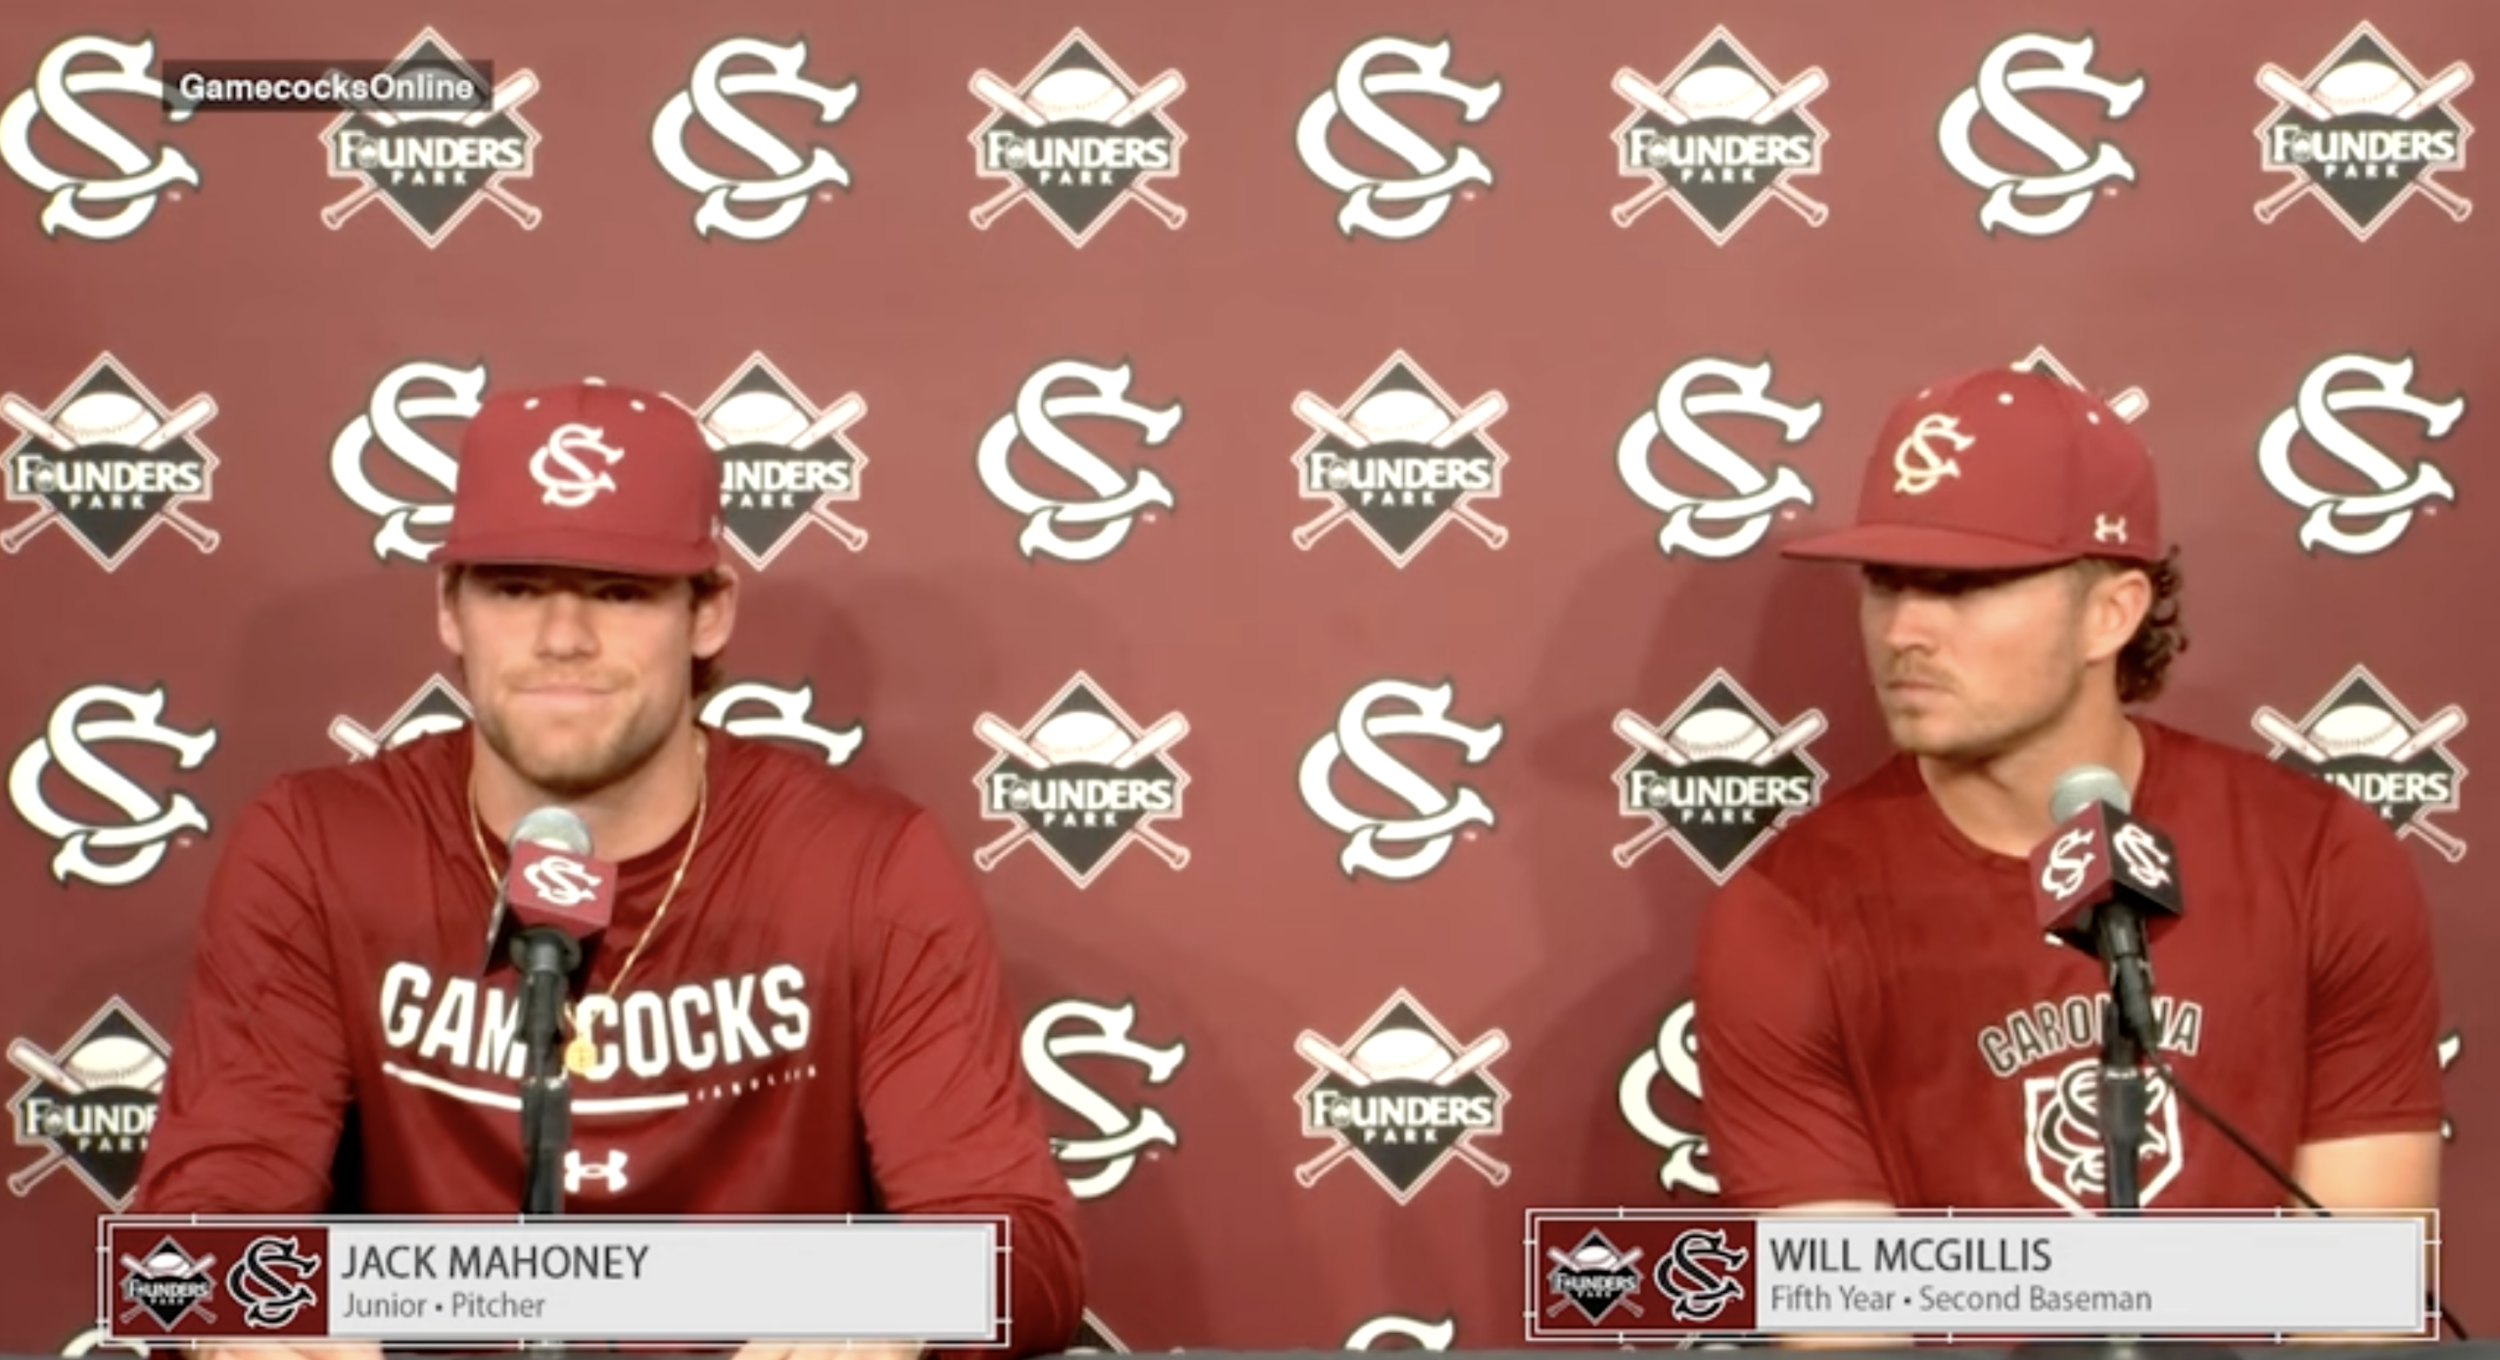 Jack Mahoney and Will McGillis News Conference